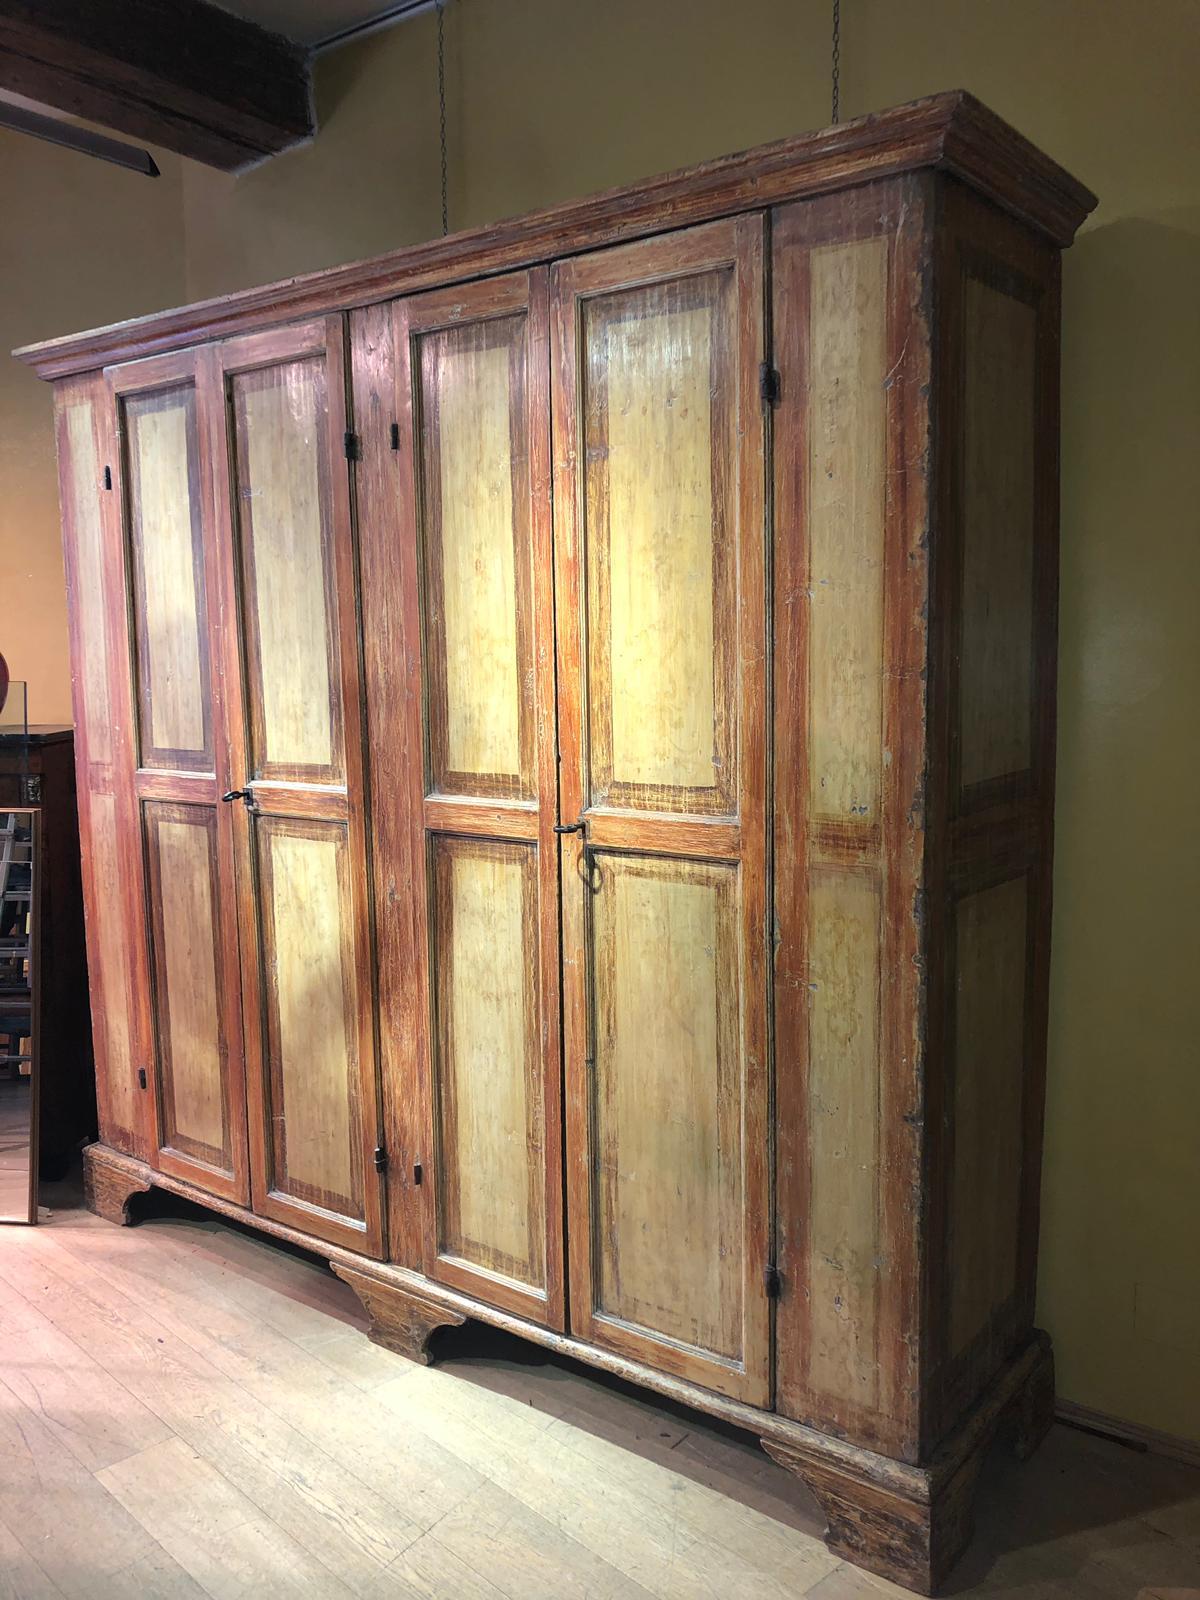 17th century Italian lacquered big cabinet
four doors, arranged internally with shelves
original lacquer
originali hardwares (lockers, hinges and keys)
Restoration: conservative
Dismountable
Size: L 253 x P 61 x H 267 cm
A video is available